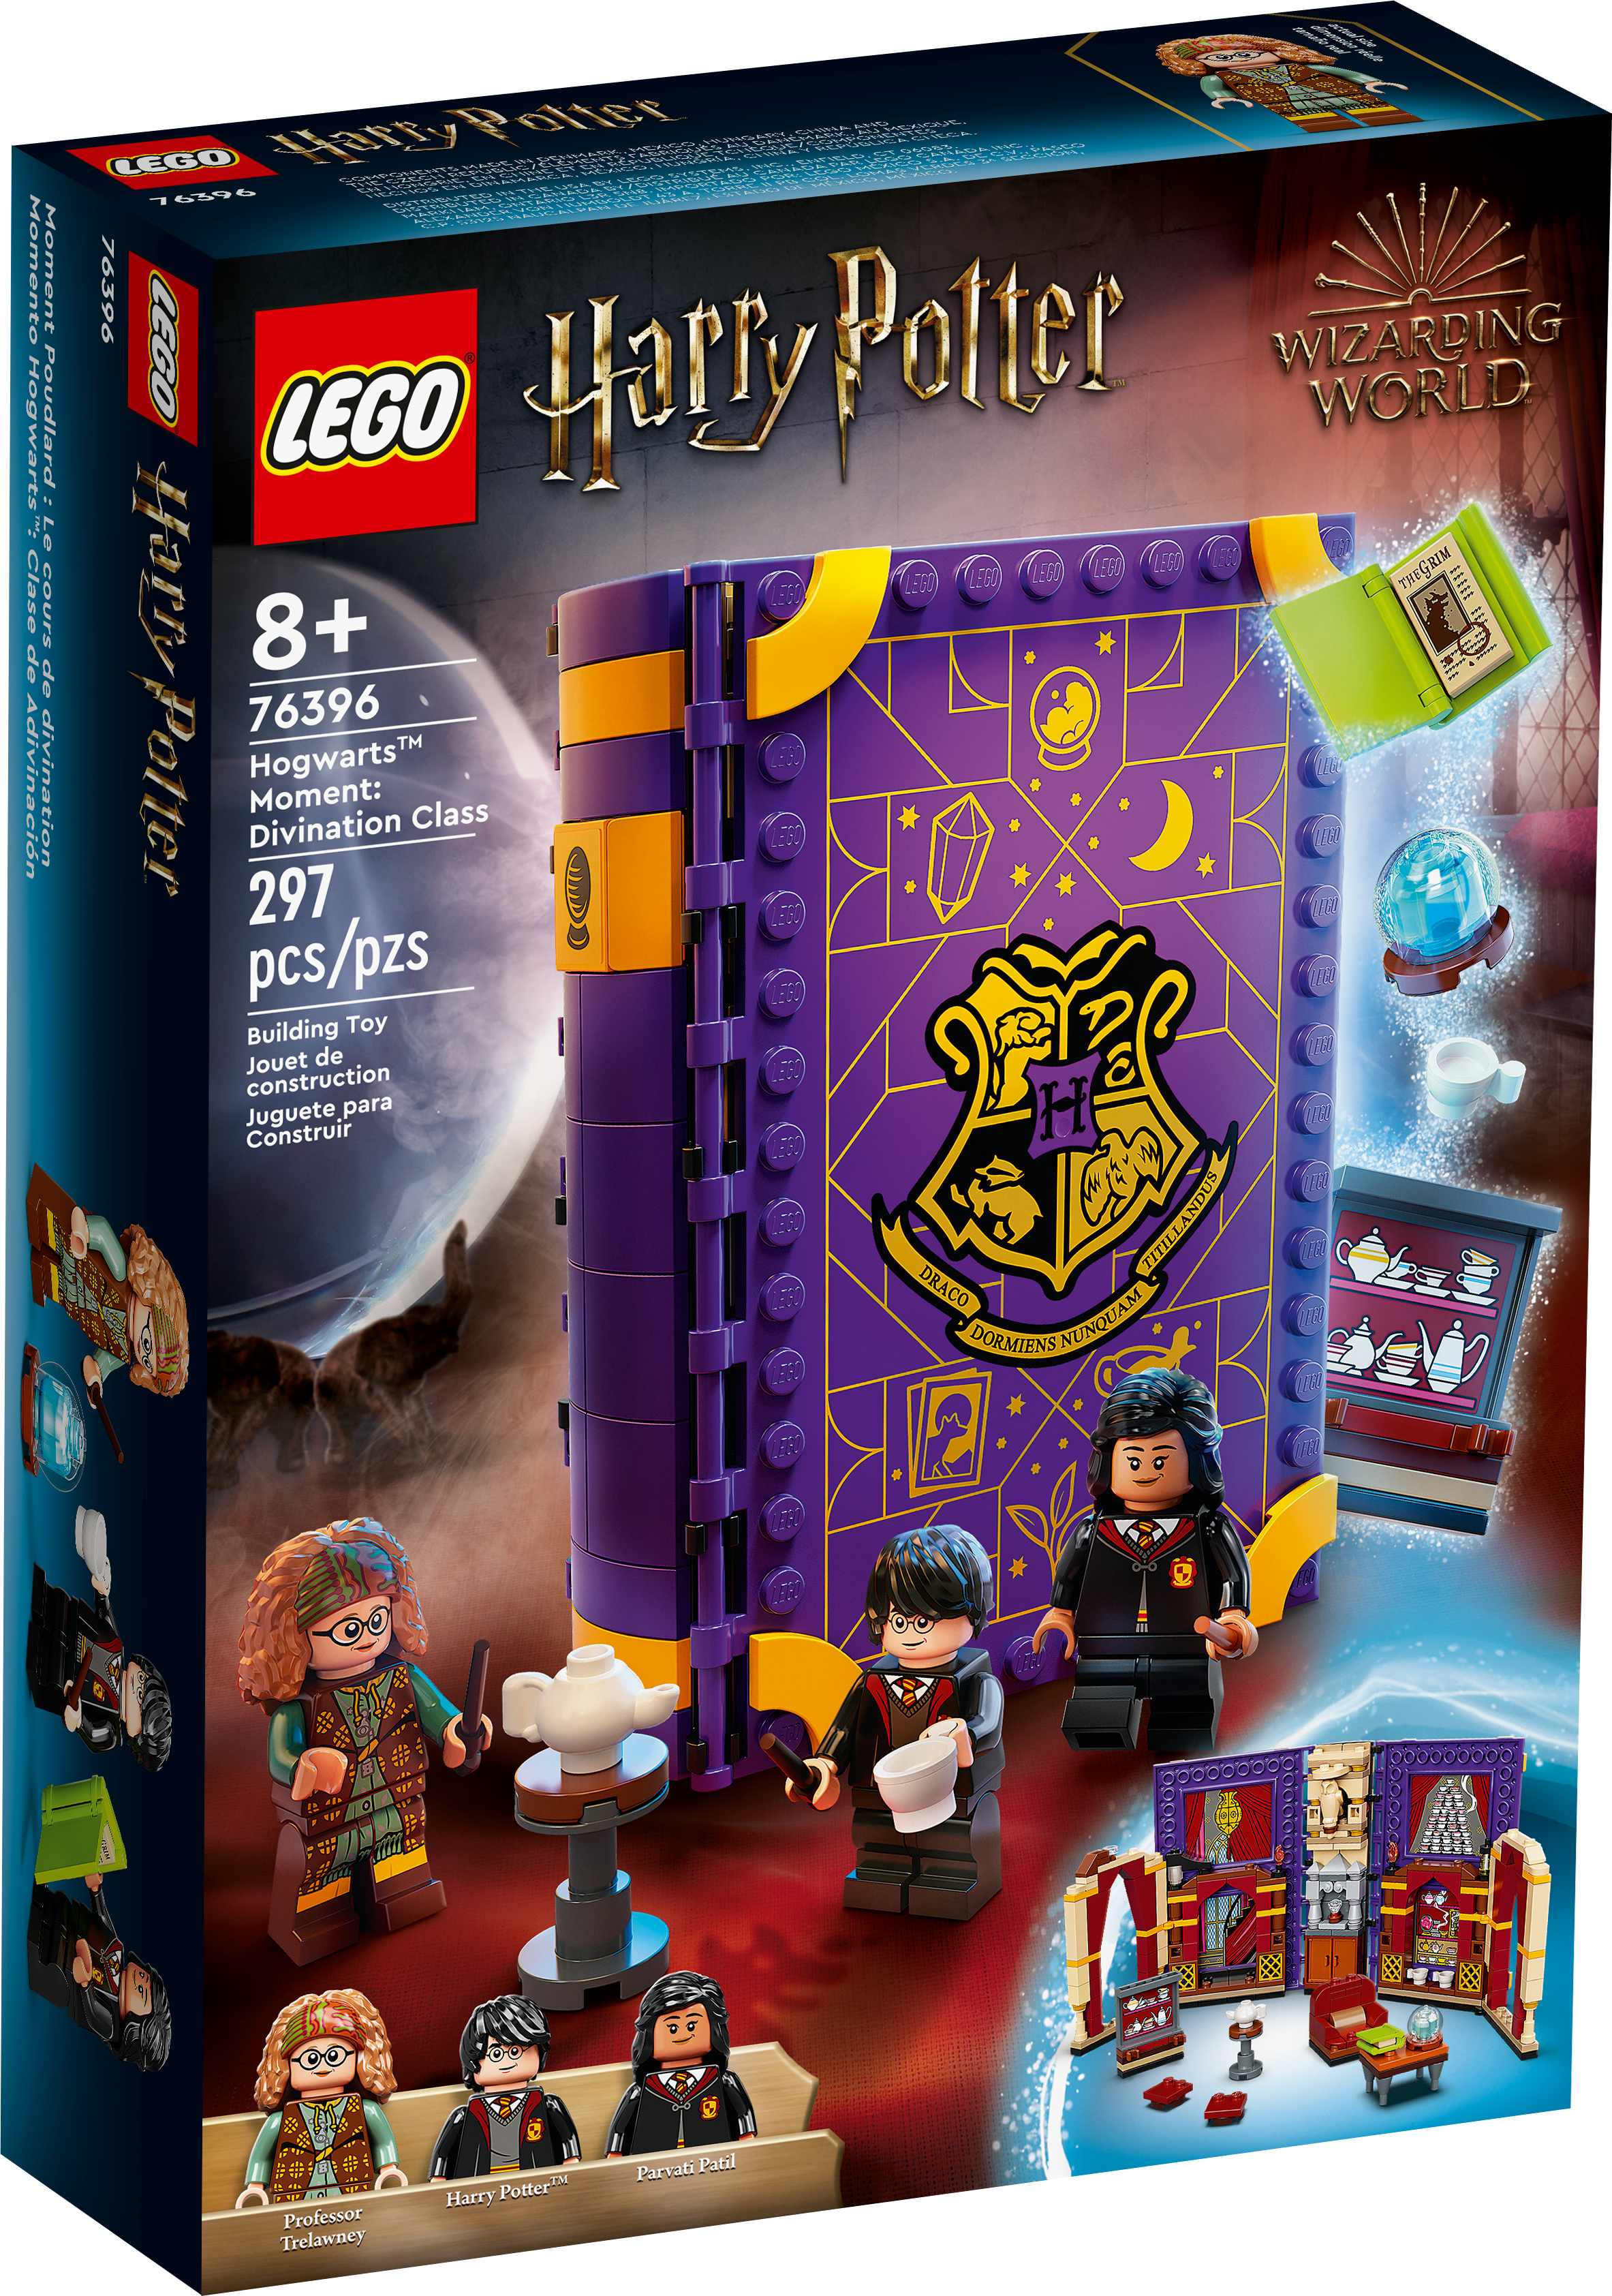 LEGO Harry Potter: Dumbledore's Army [Book]